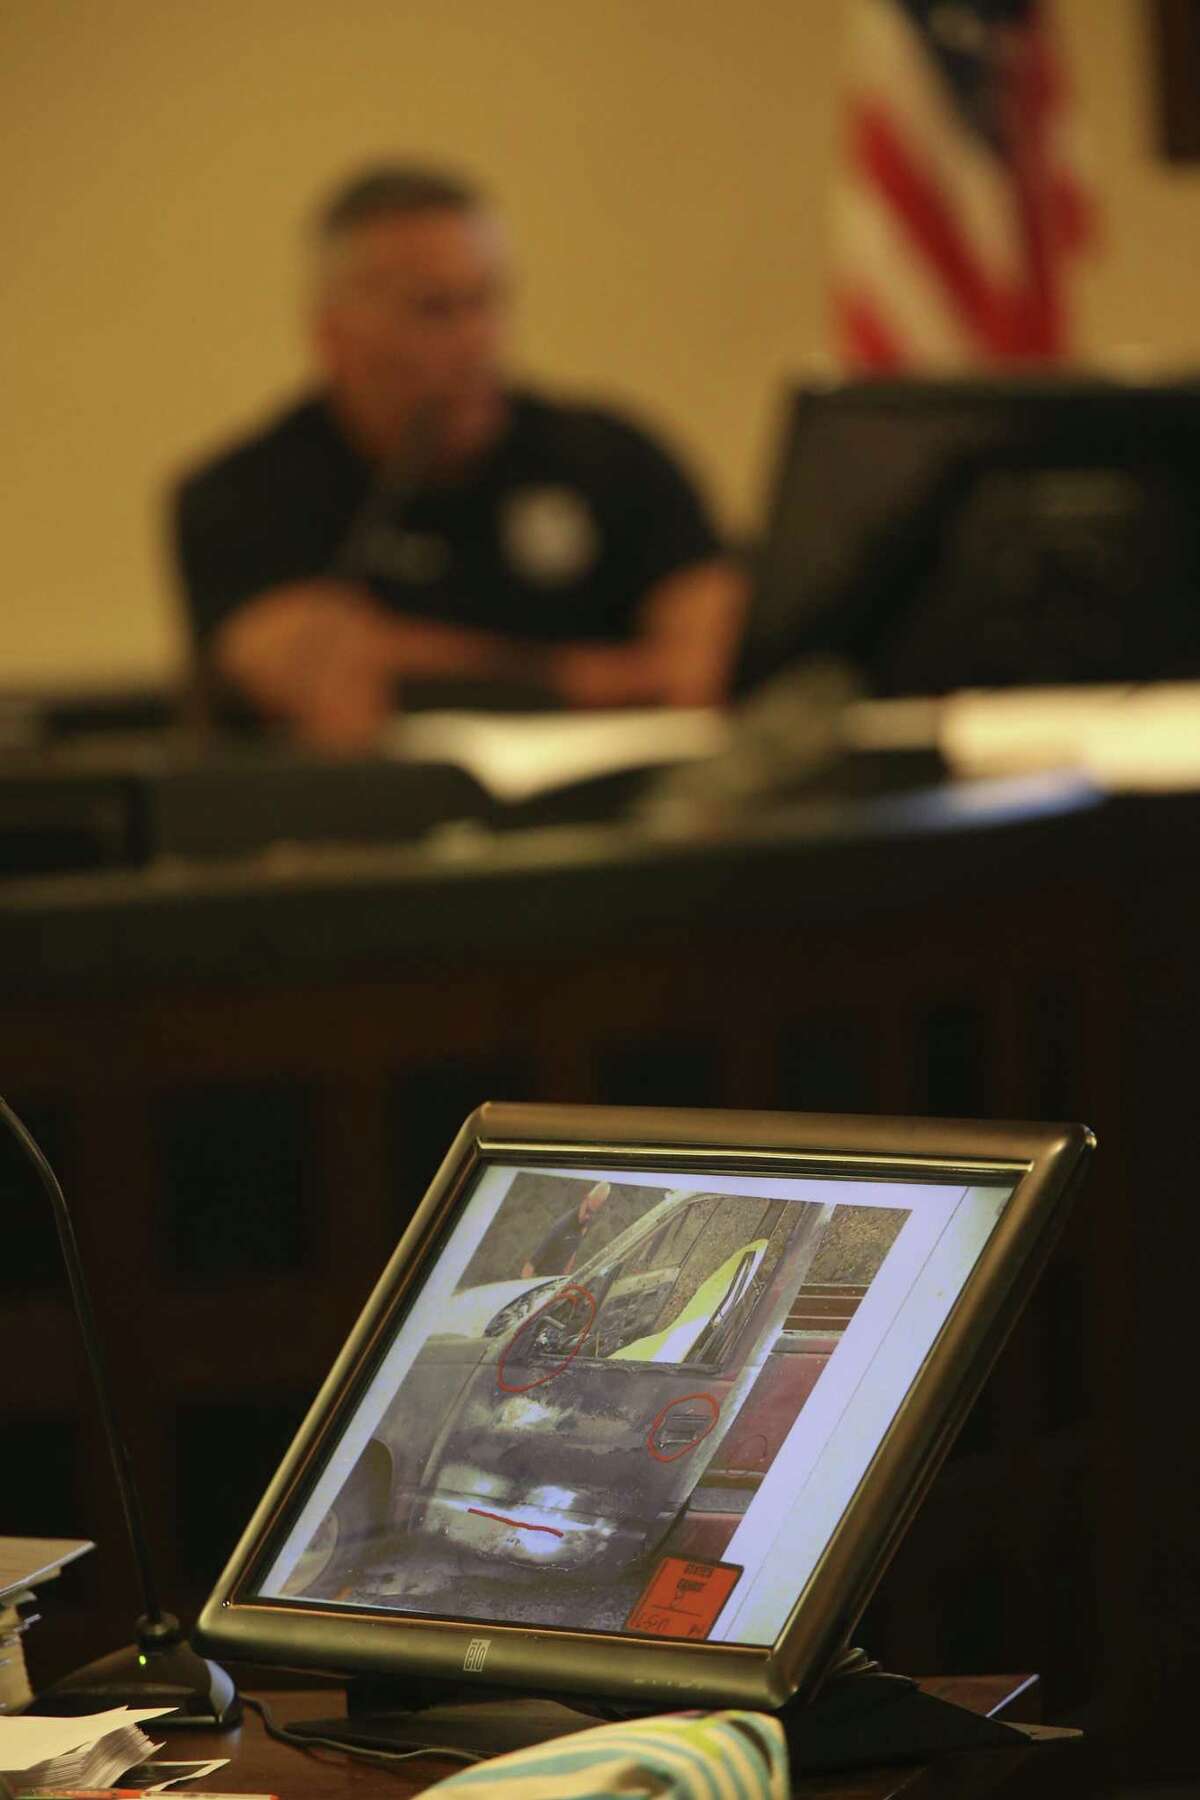 Photographs from the scene are introduced as evidence Tuesday during the second day of the murder trial of Joel Soto. San Antonio Fire Department Arson Investigator Juan Martinez is on the witness stand.